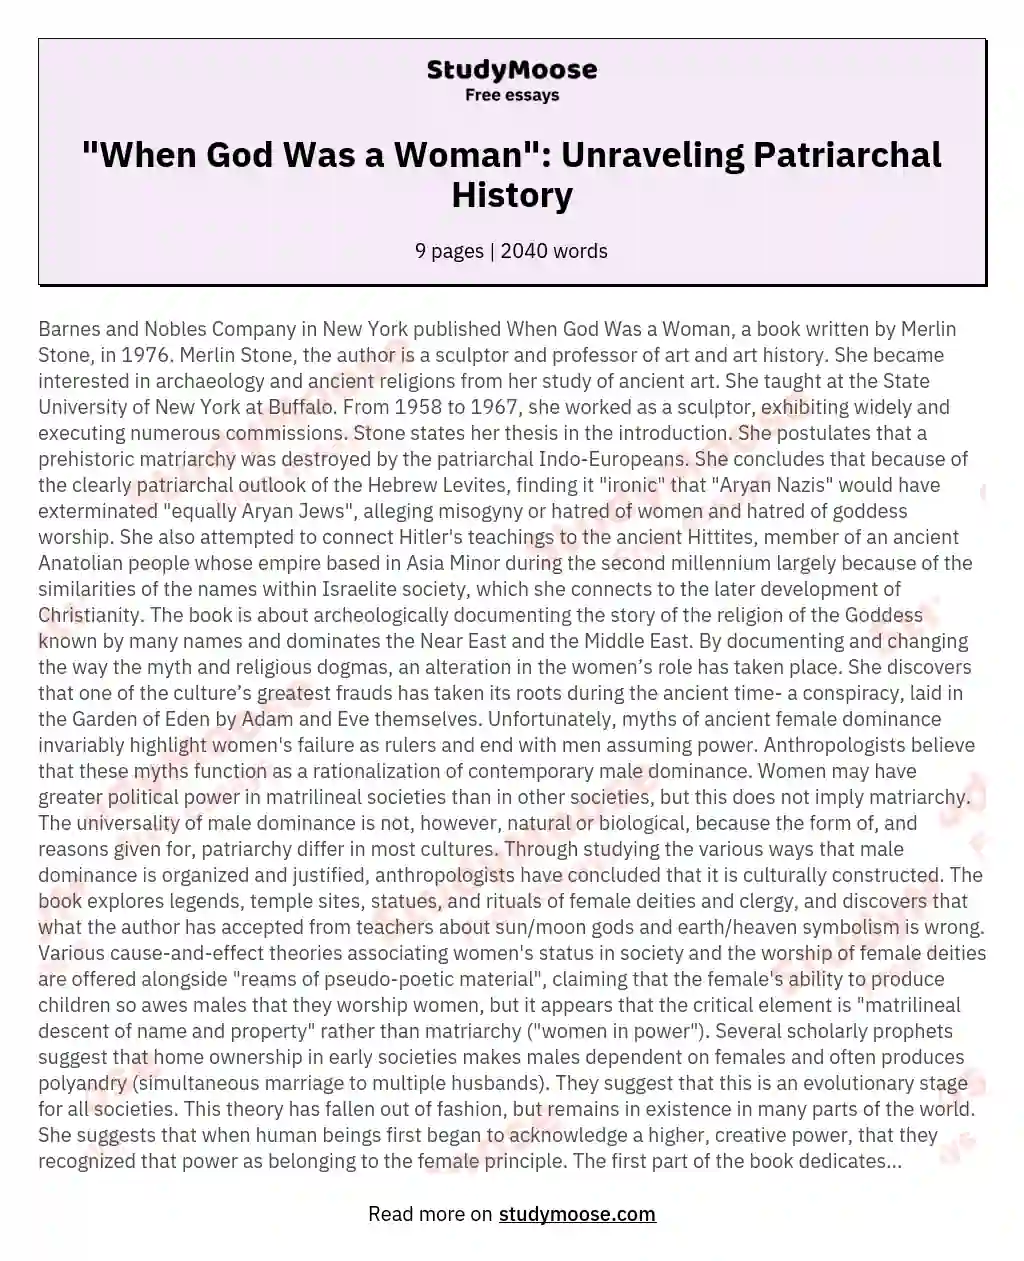 "When God Was a Woman": Unraveling Patriarchal History essay